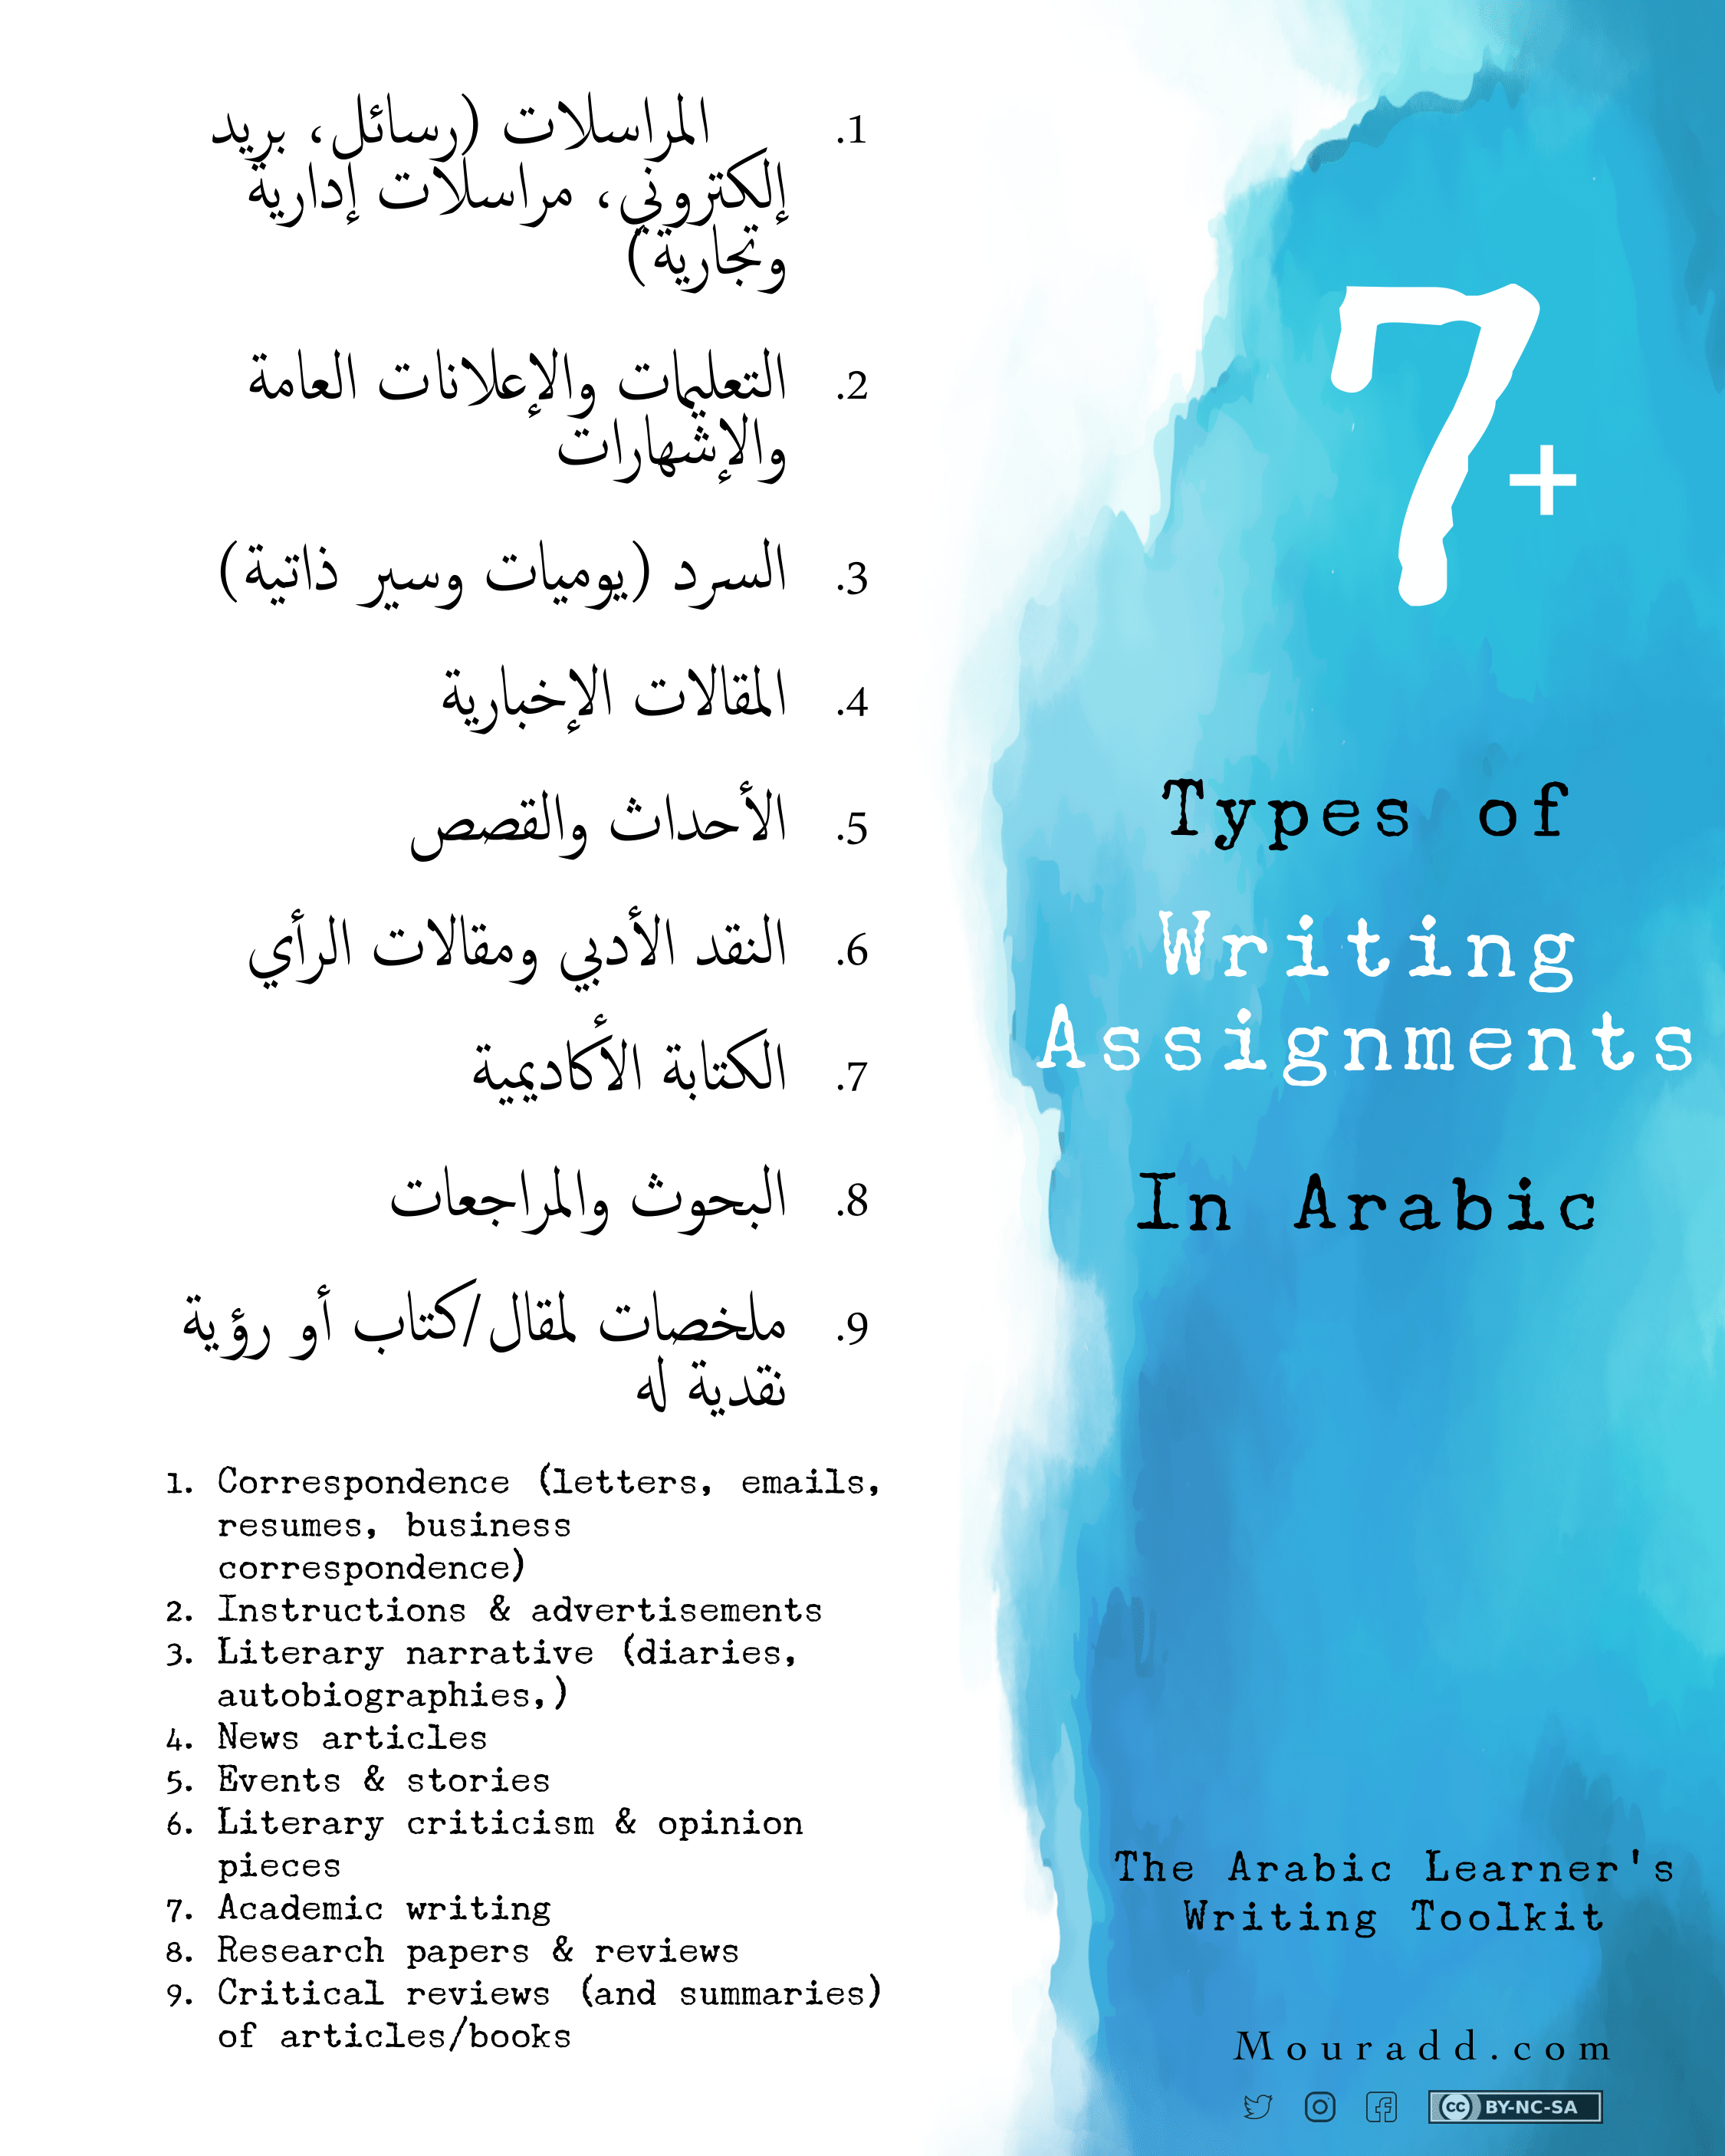 assignment in arabic word